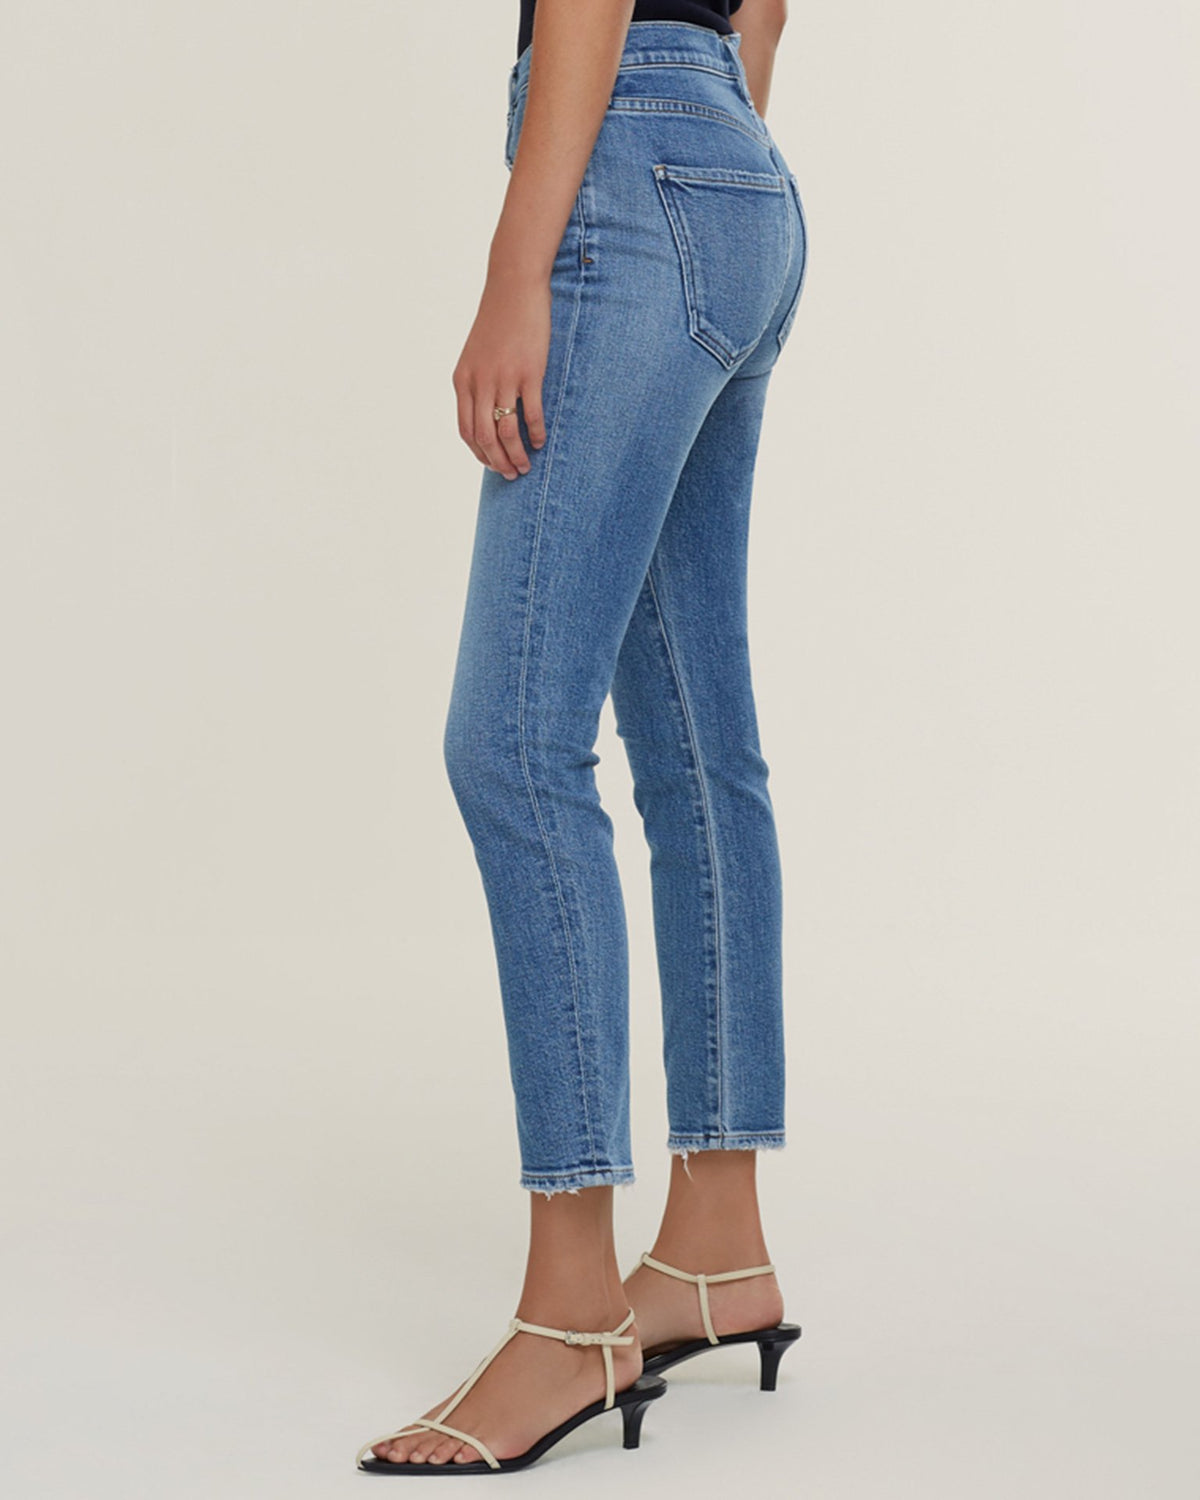 AGOLDE Denim Toni Mid Rise Straight in Viewpoint